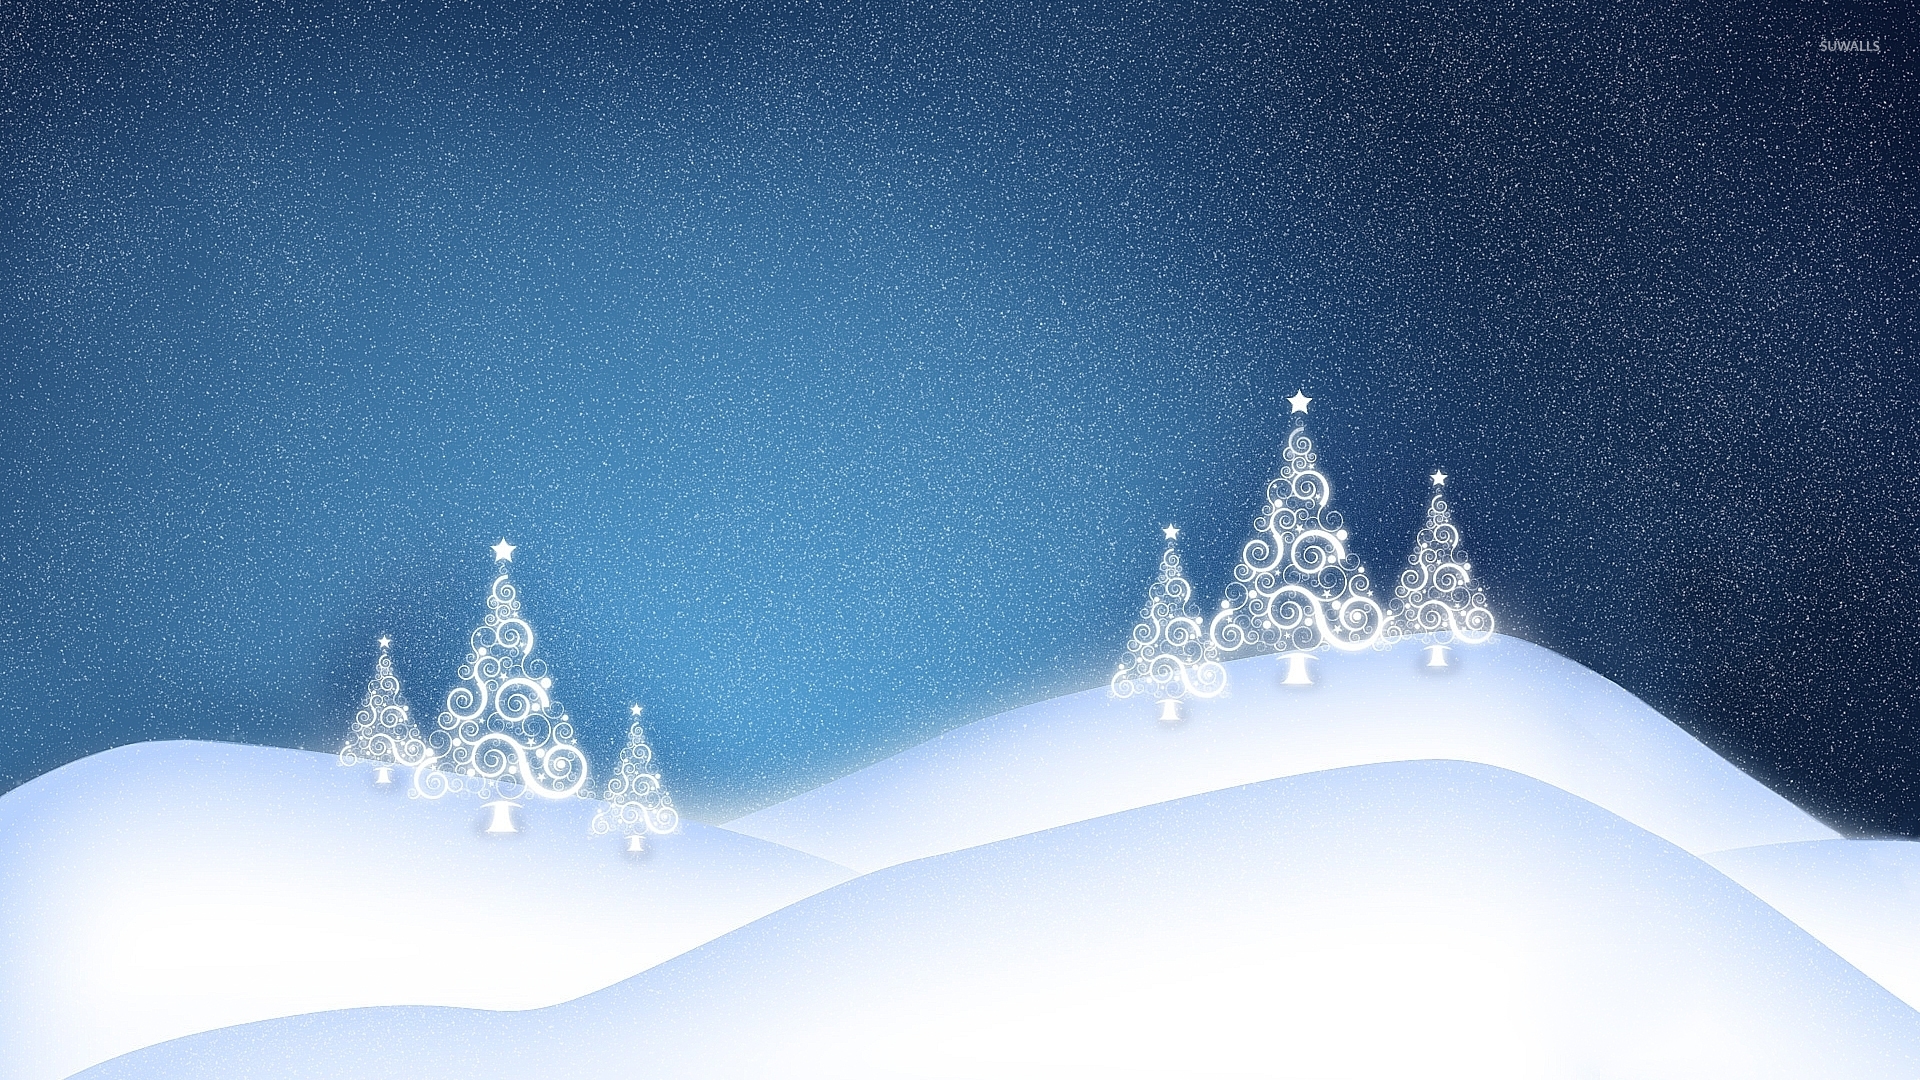 White glowing Christmas tree on the snowy hills wallpaper wallpaper